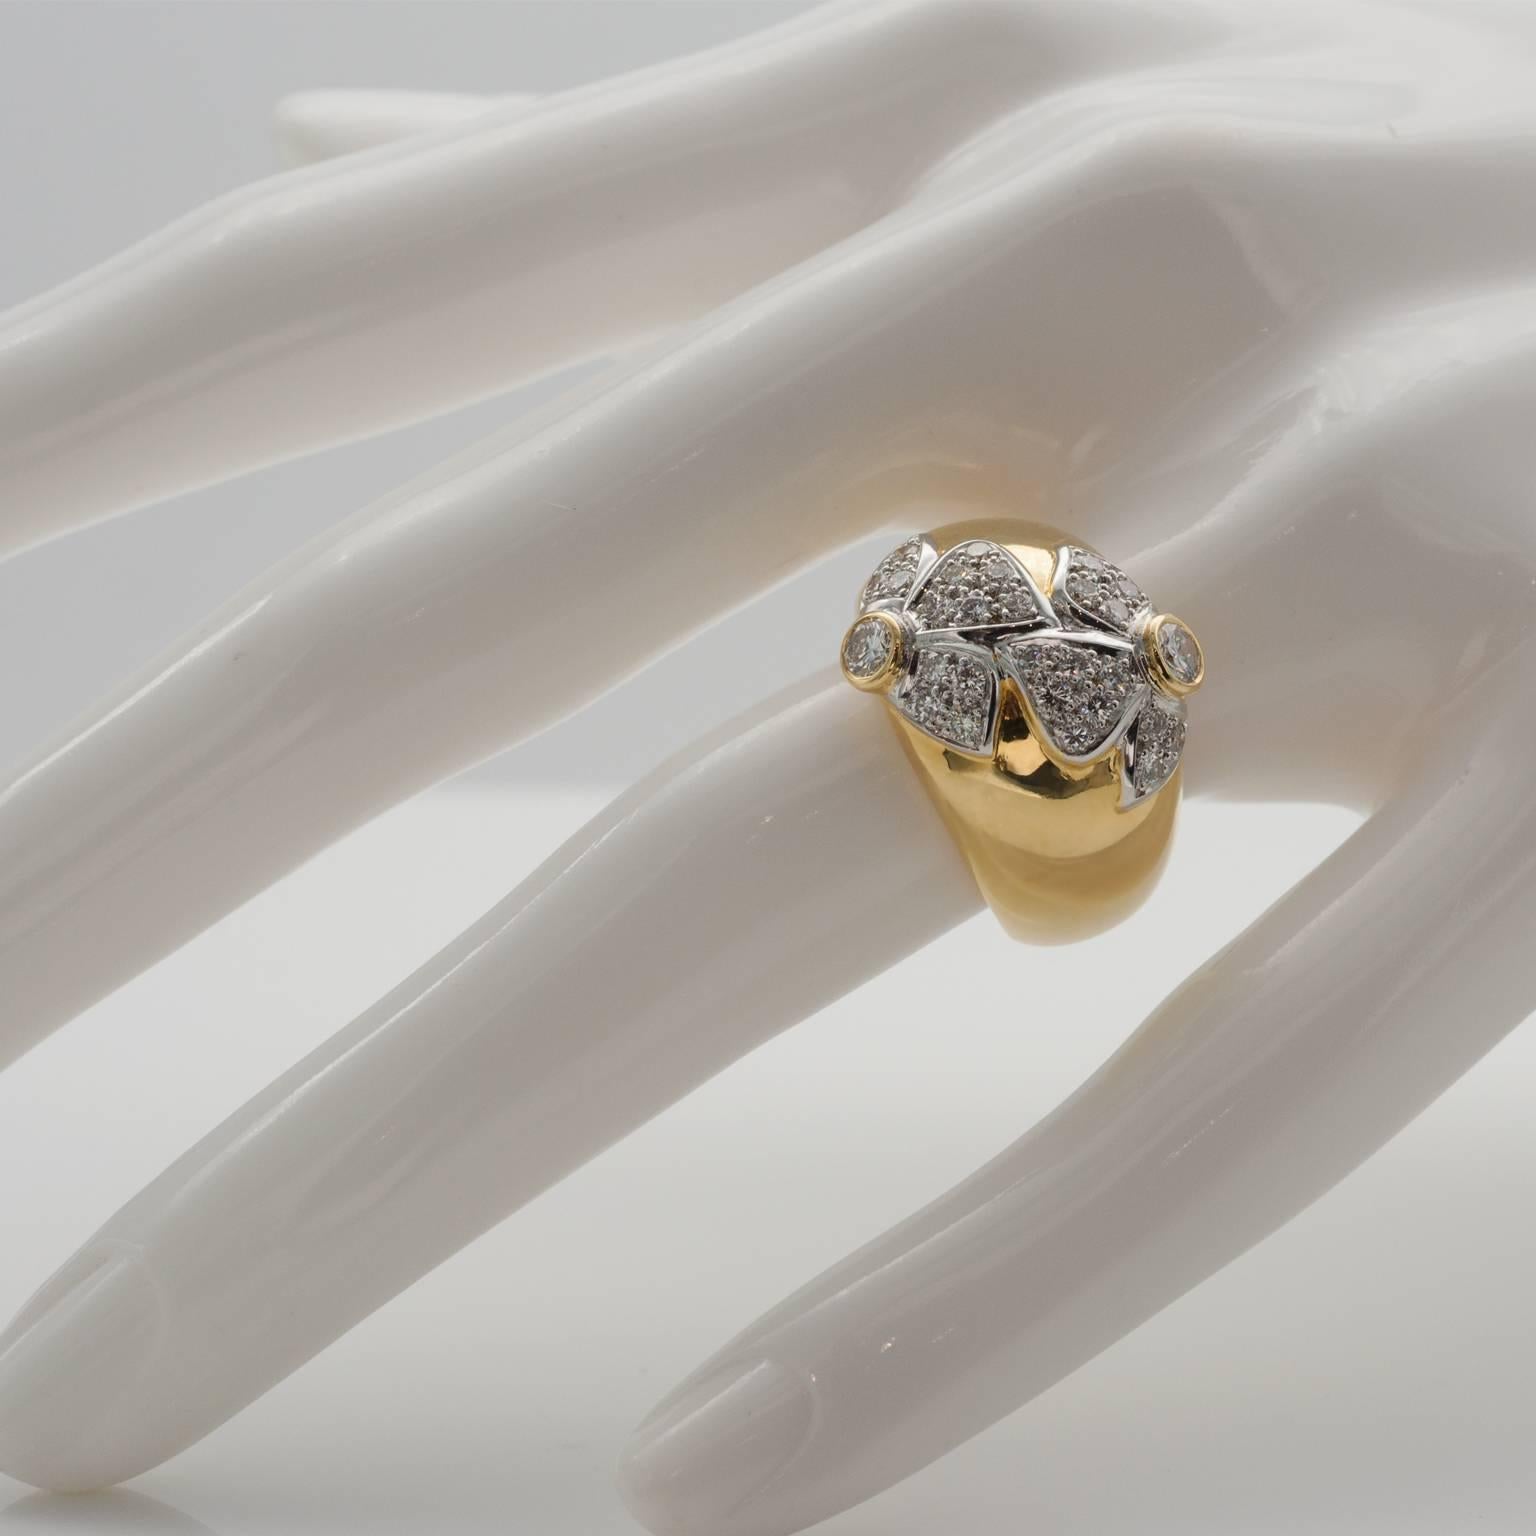 Exquisite dome ring, Two delicate white gold flowers set with diamonds on a yellow gold domed ring. Very pure design; elegant and poetic.
Diamonds : approximately 0.85 carat , The two bigger diamonds are about 0.15 each